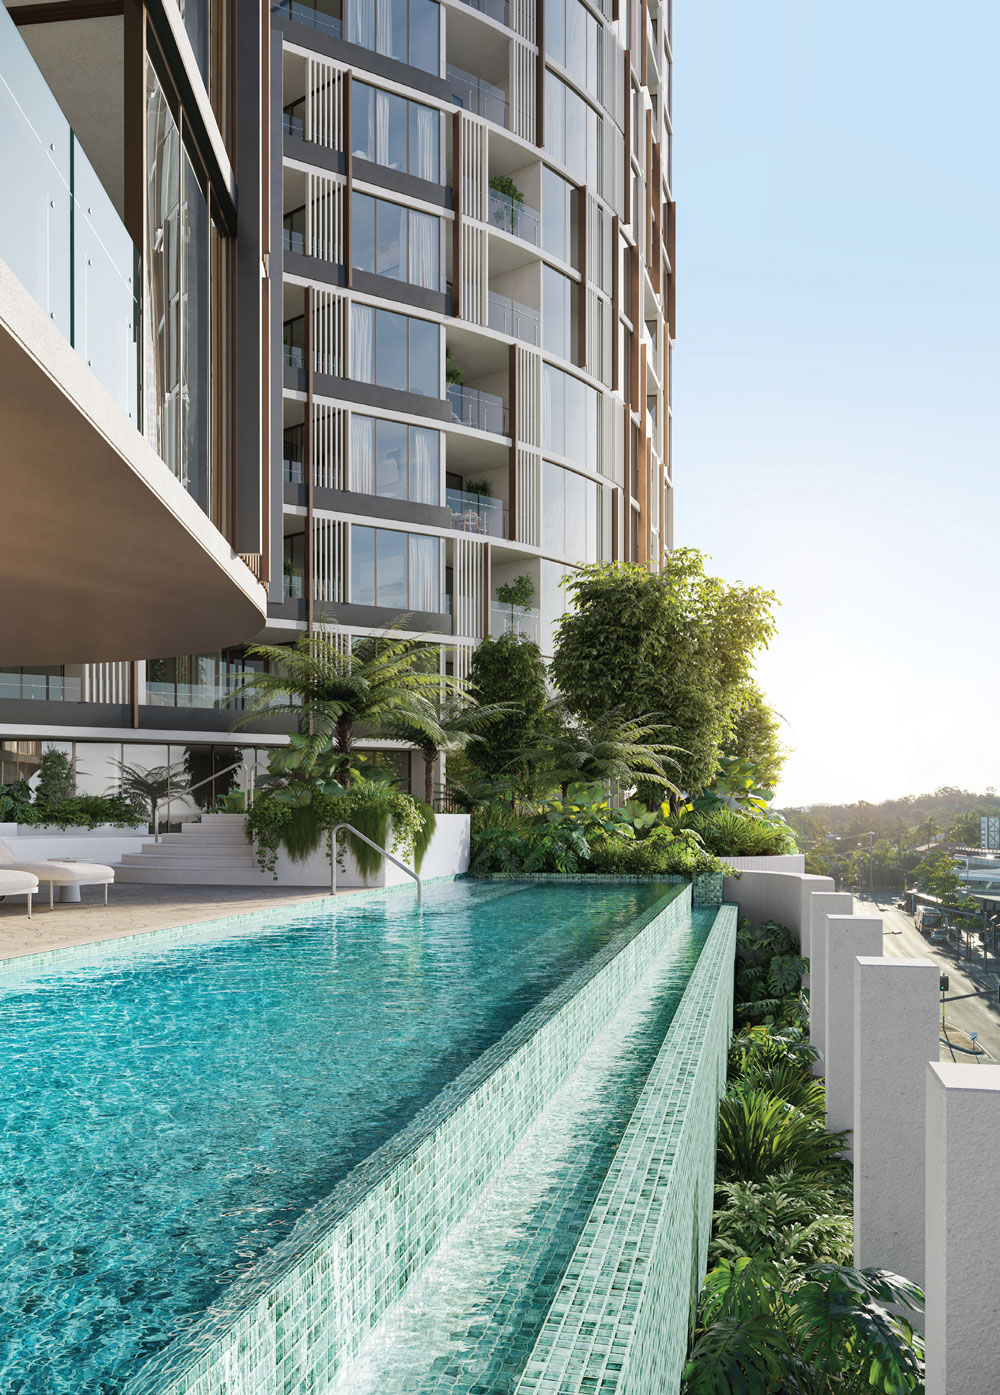 Architectural rendering of the pool area of Keylin's proposed built-to-rent development on Station Rd, Indooroopilly